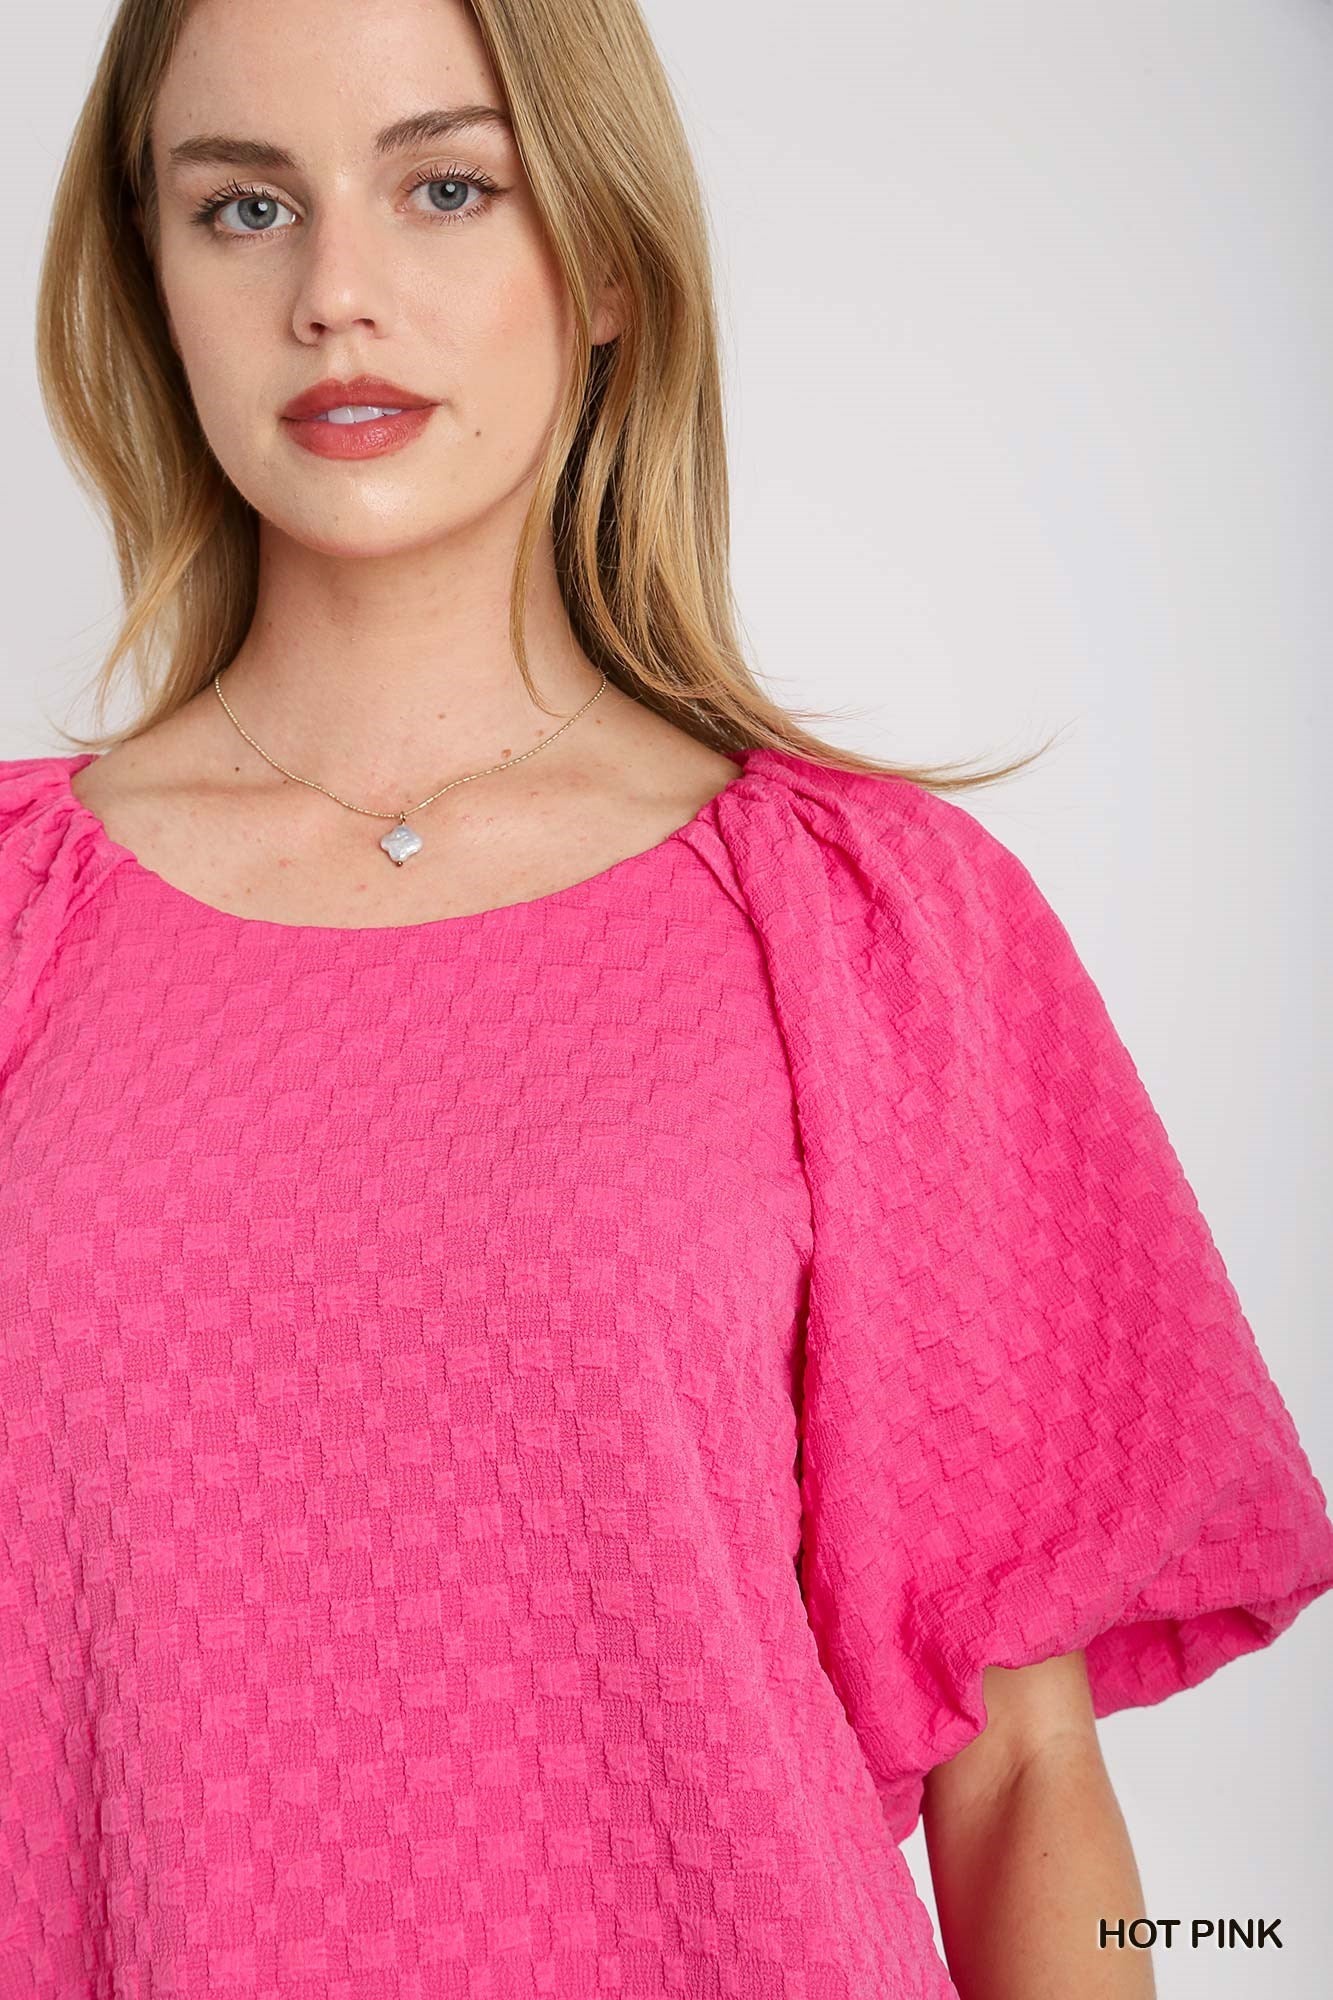 Hot Pink Round Neck Boxy Cut Puff Sleeve Top